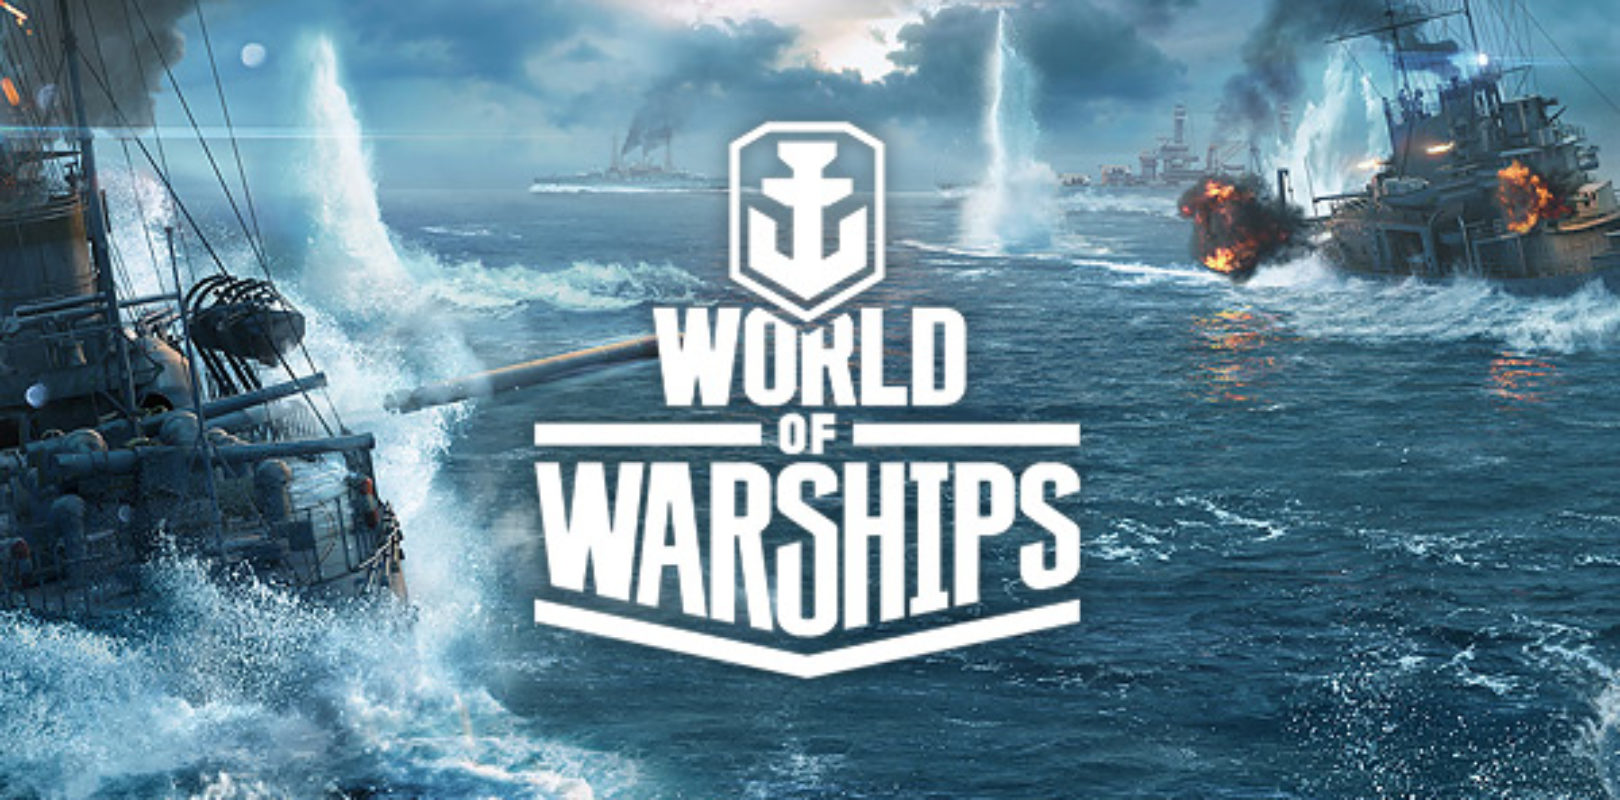 world of warships redeemable codes 4 year anversary